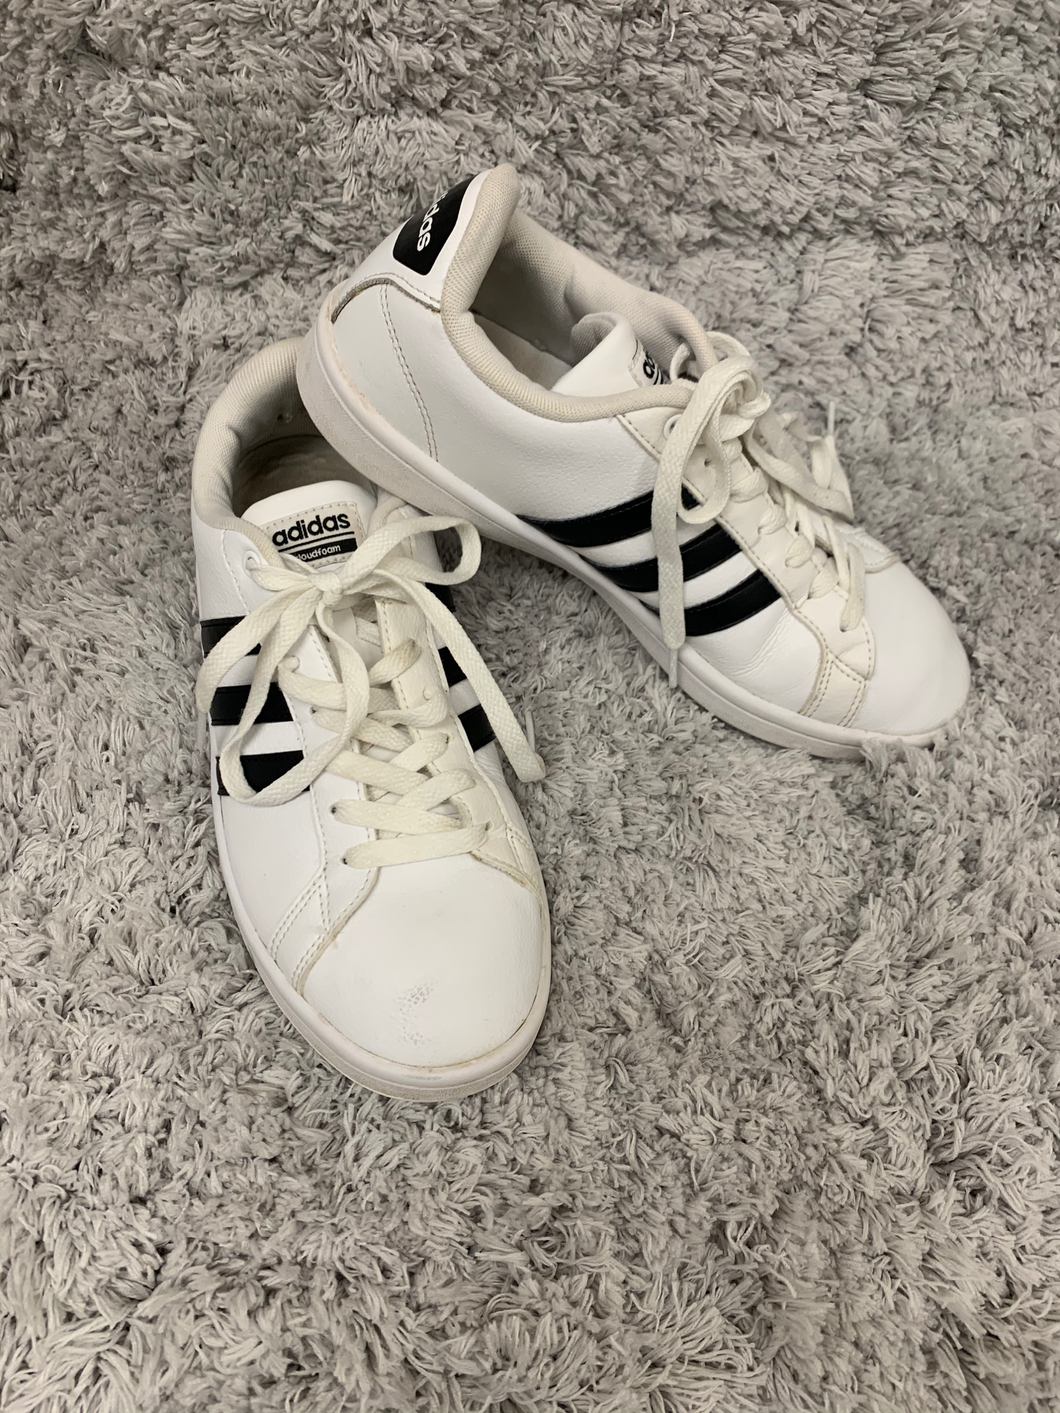 Adidas Casual Shoes Womens 8